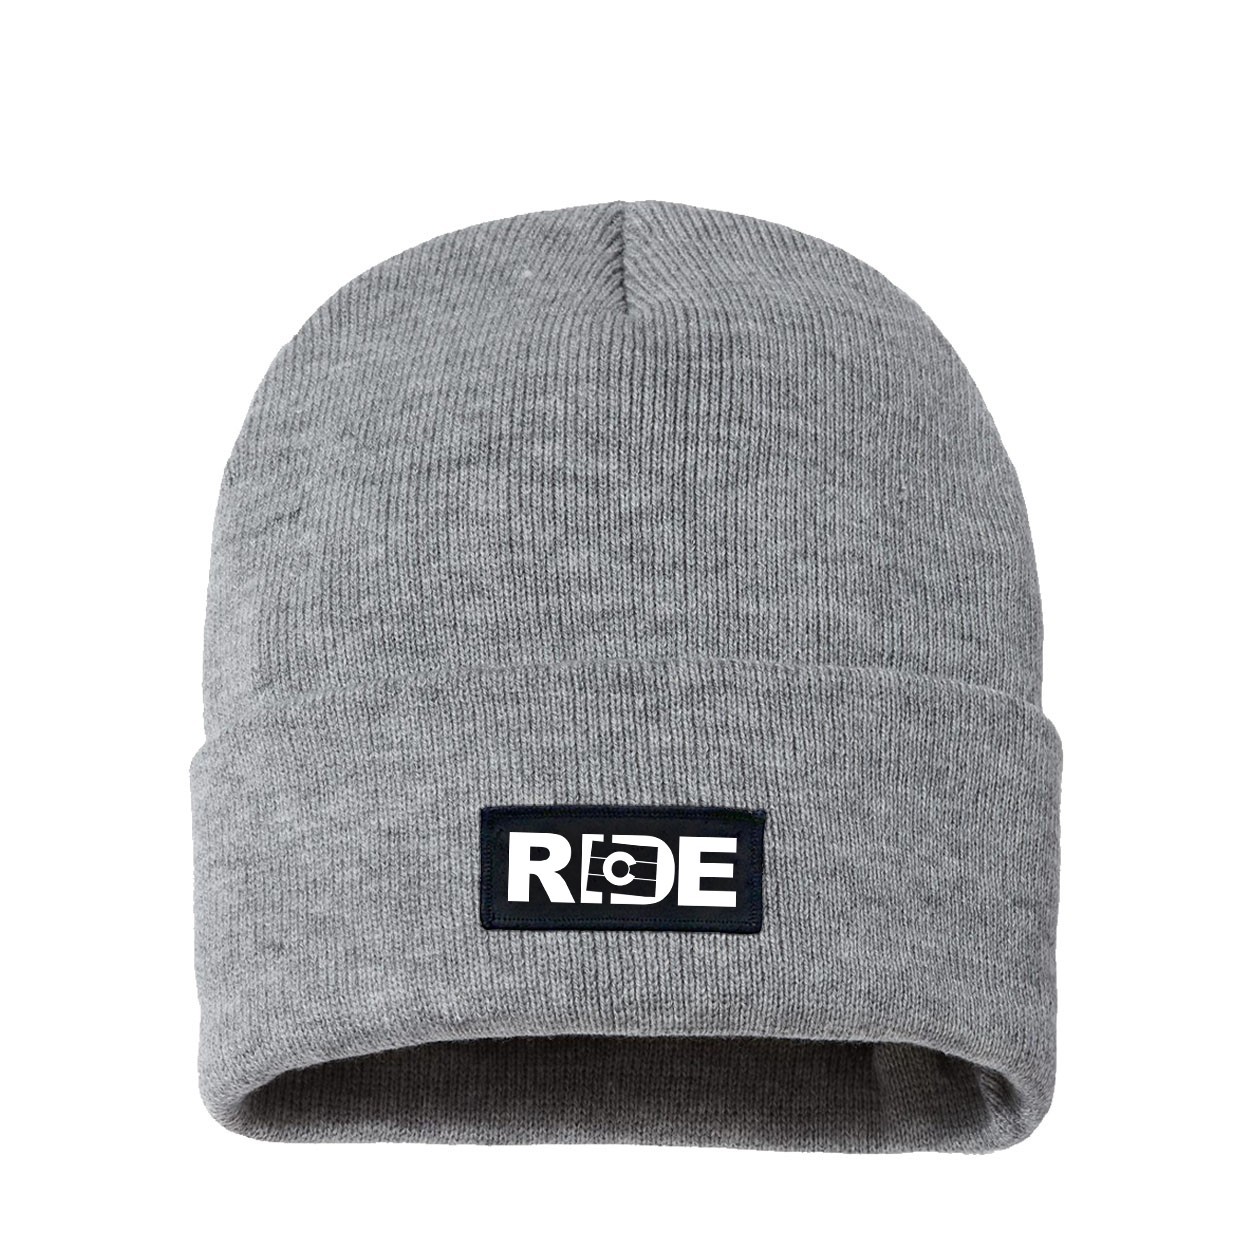 Ride Colorado Night Out Woven Patch Night Out Sherpa Lined Cuffed Beanie Heather Gray (White Logo)